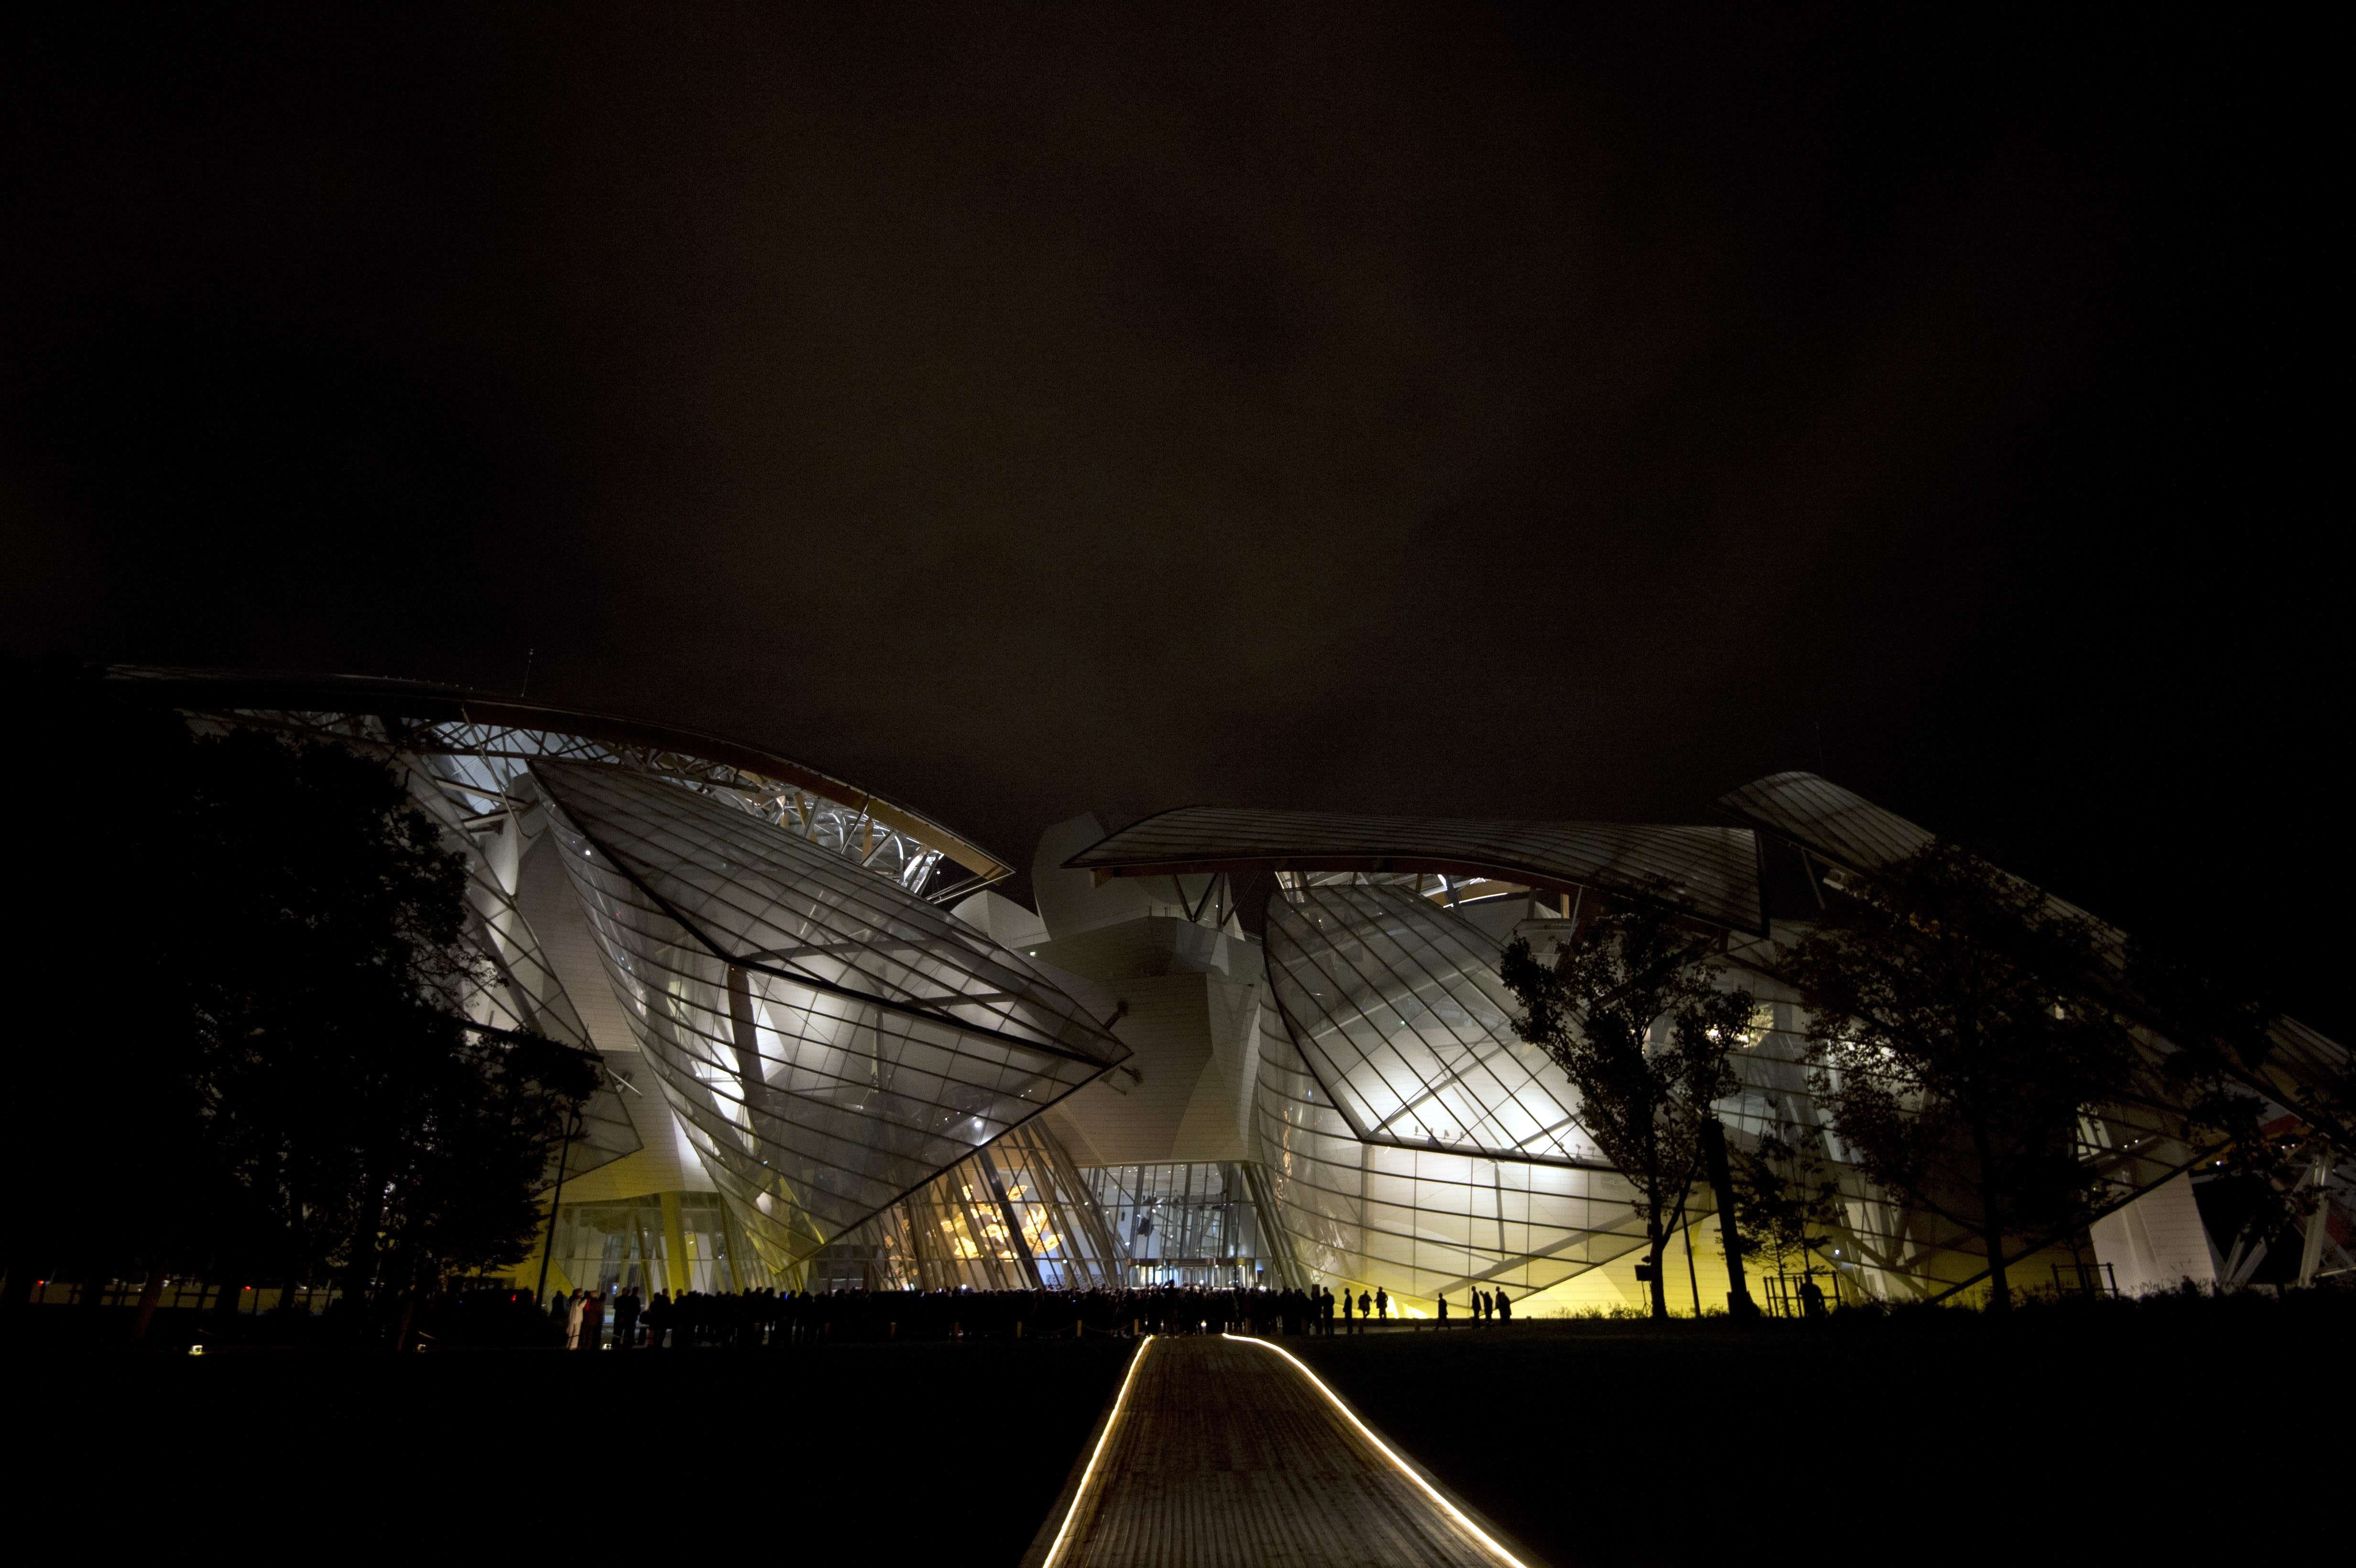 LVMH - On October 11, 2017 the Fondation Louis Vuitton is